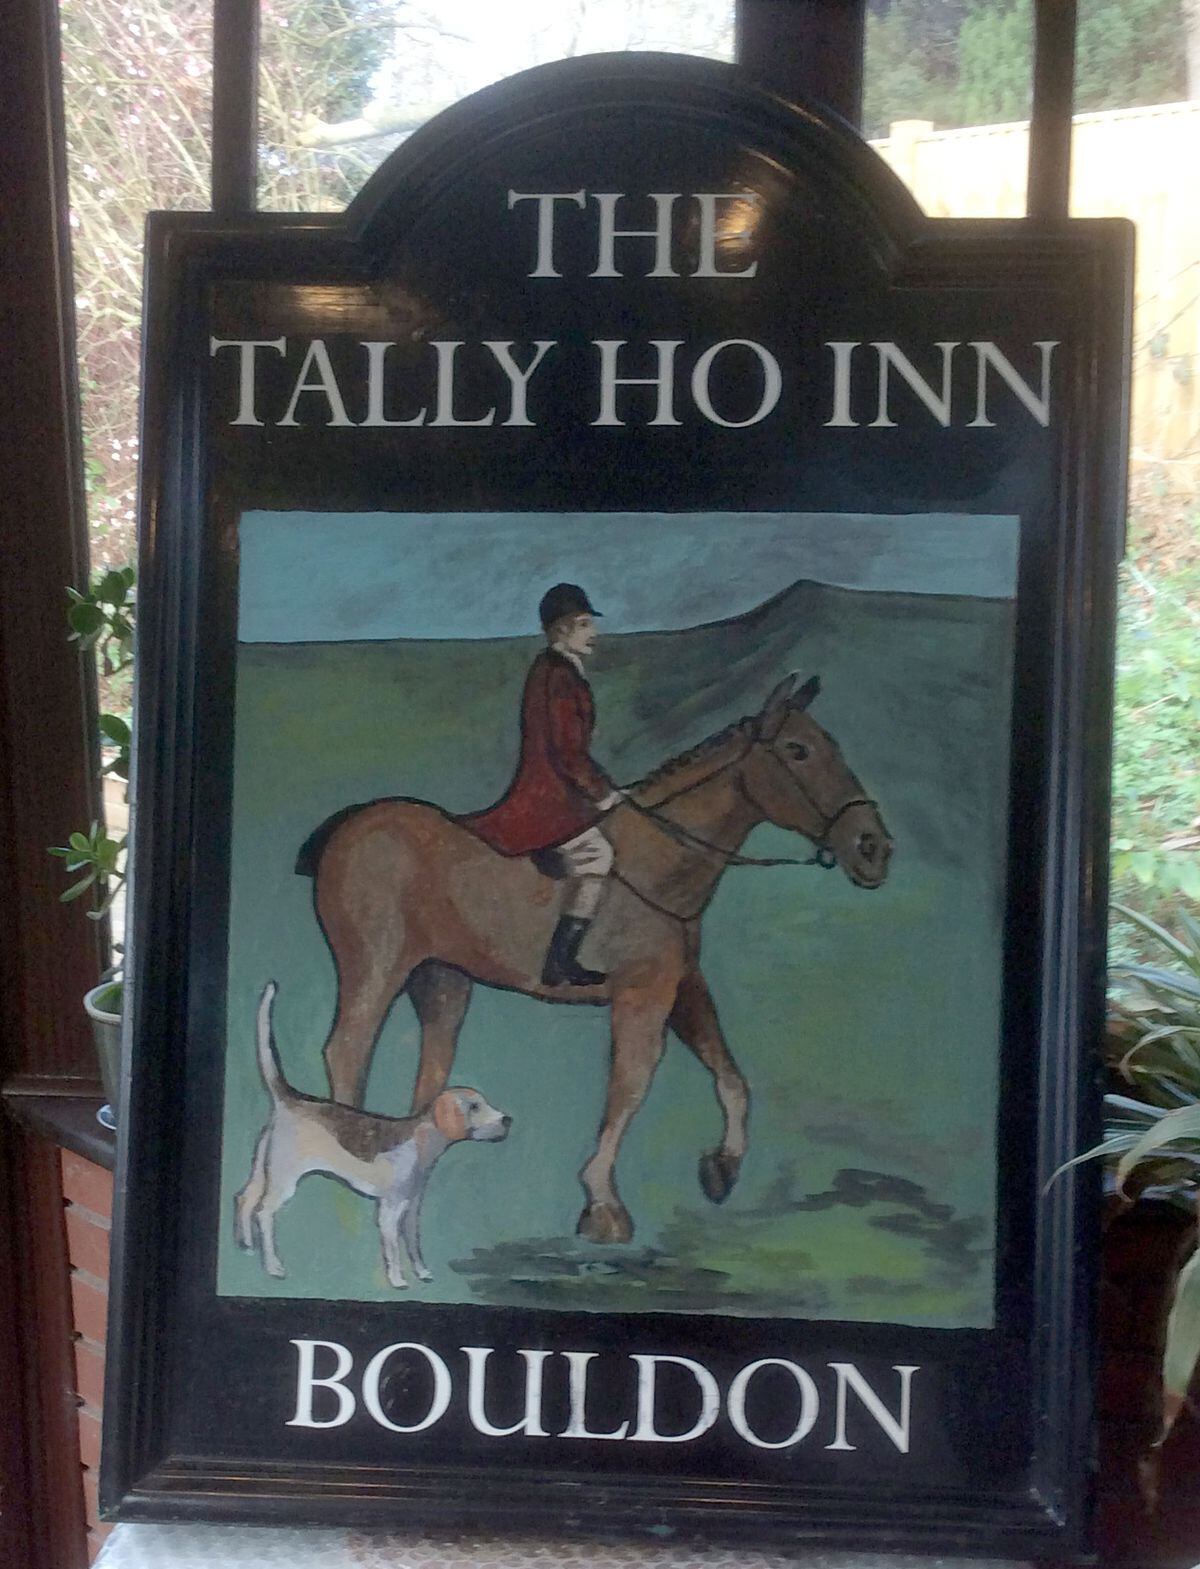 The restored pub sign awaits rehanging.